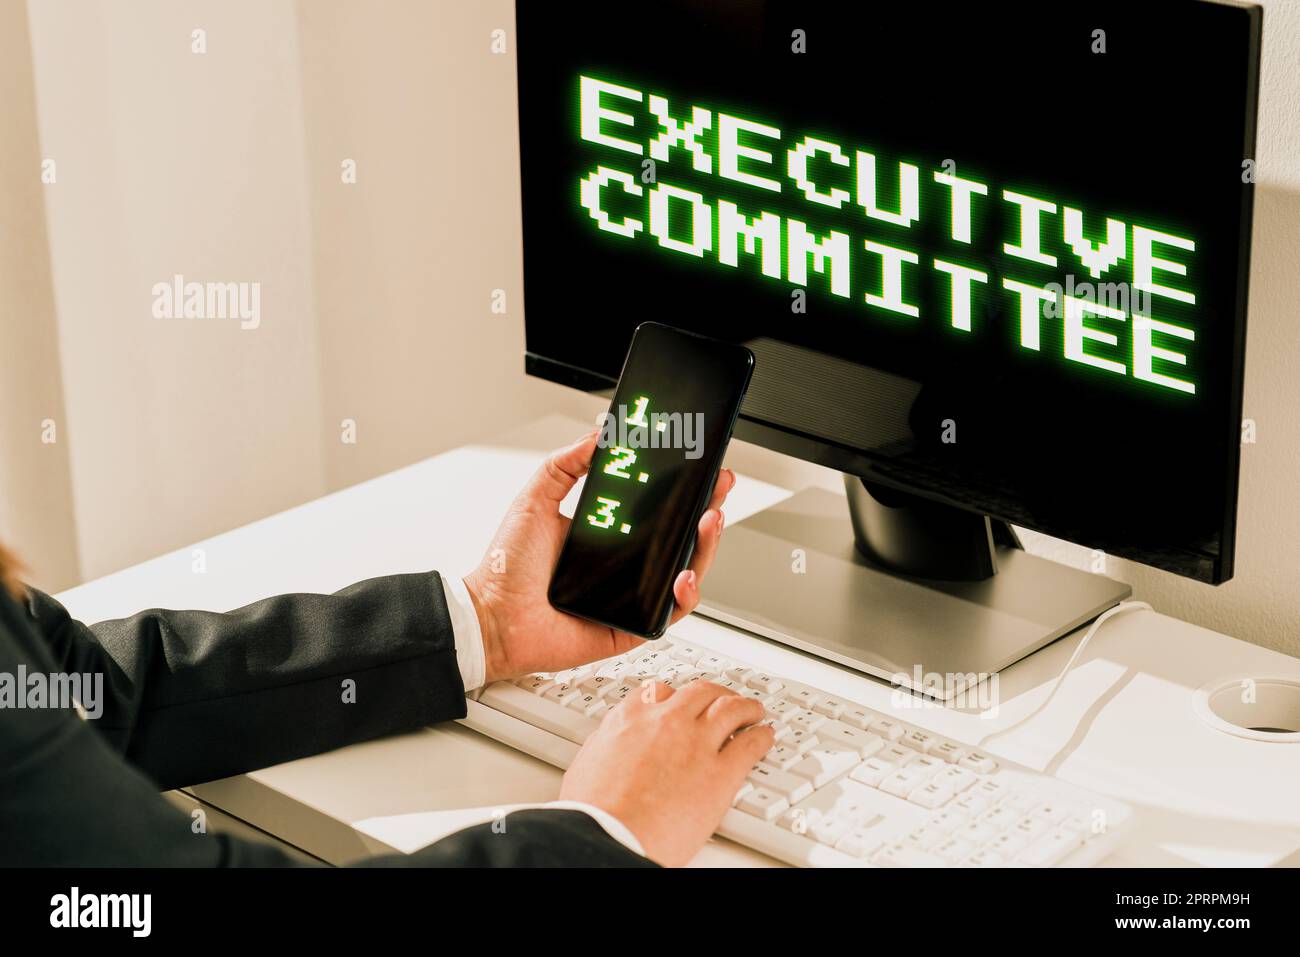 Conceptual caption Executive Committee. Word Written on Group of Directors appointed Has Authority in Decisions Stock Photo